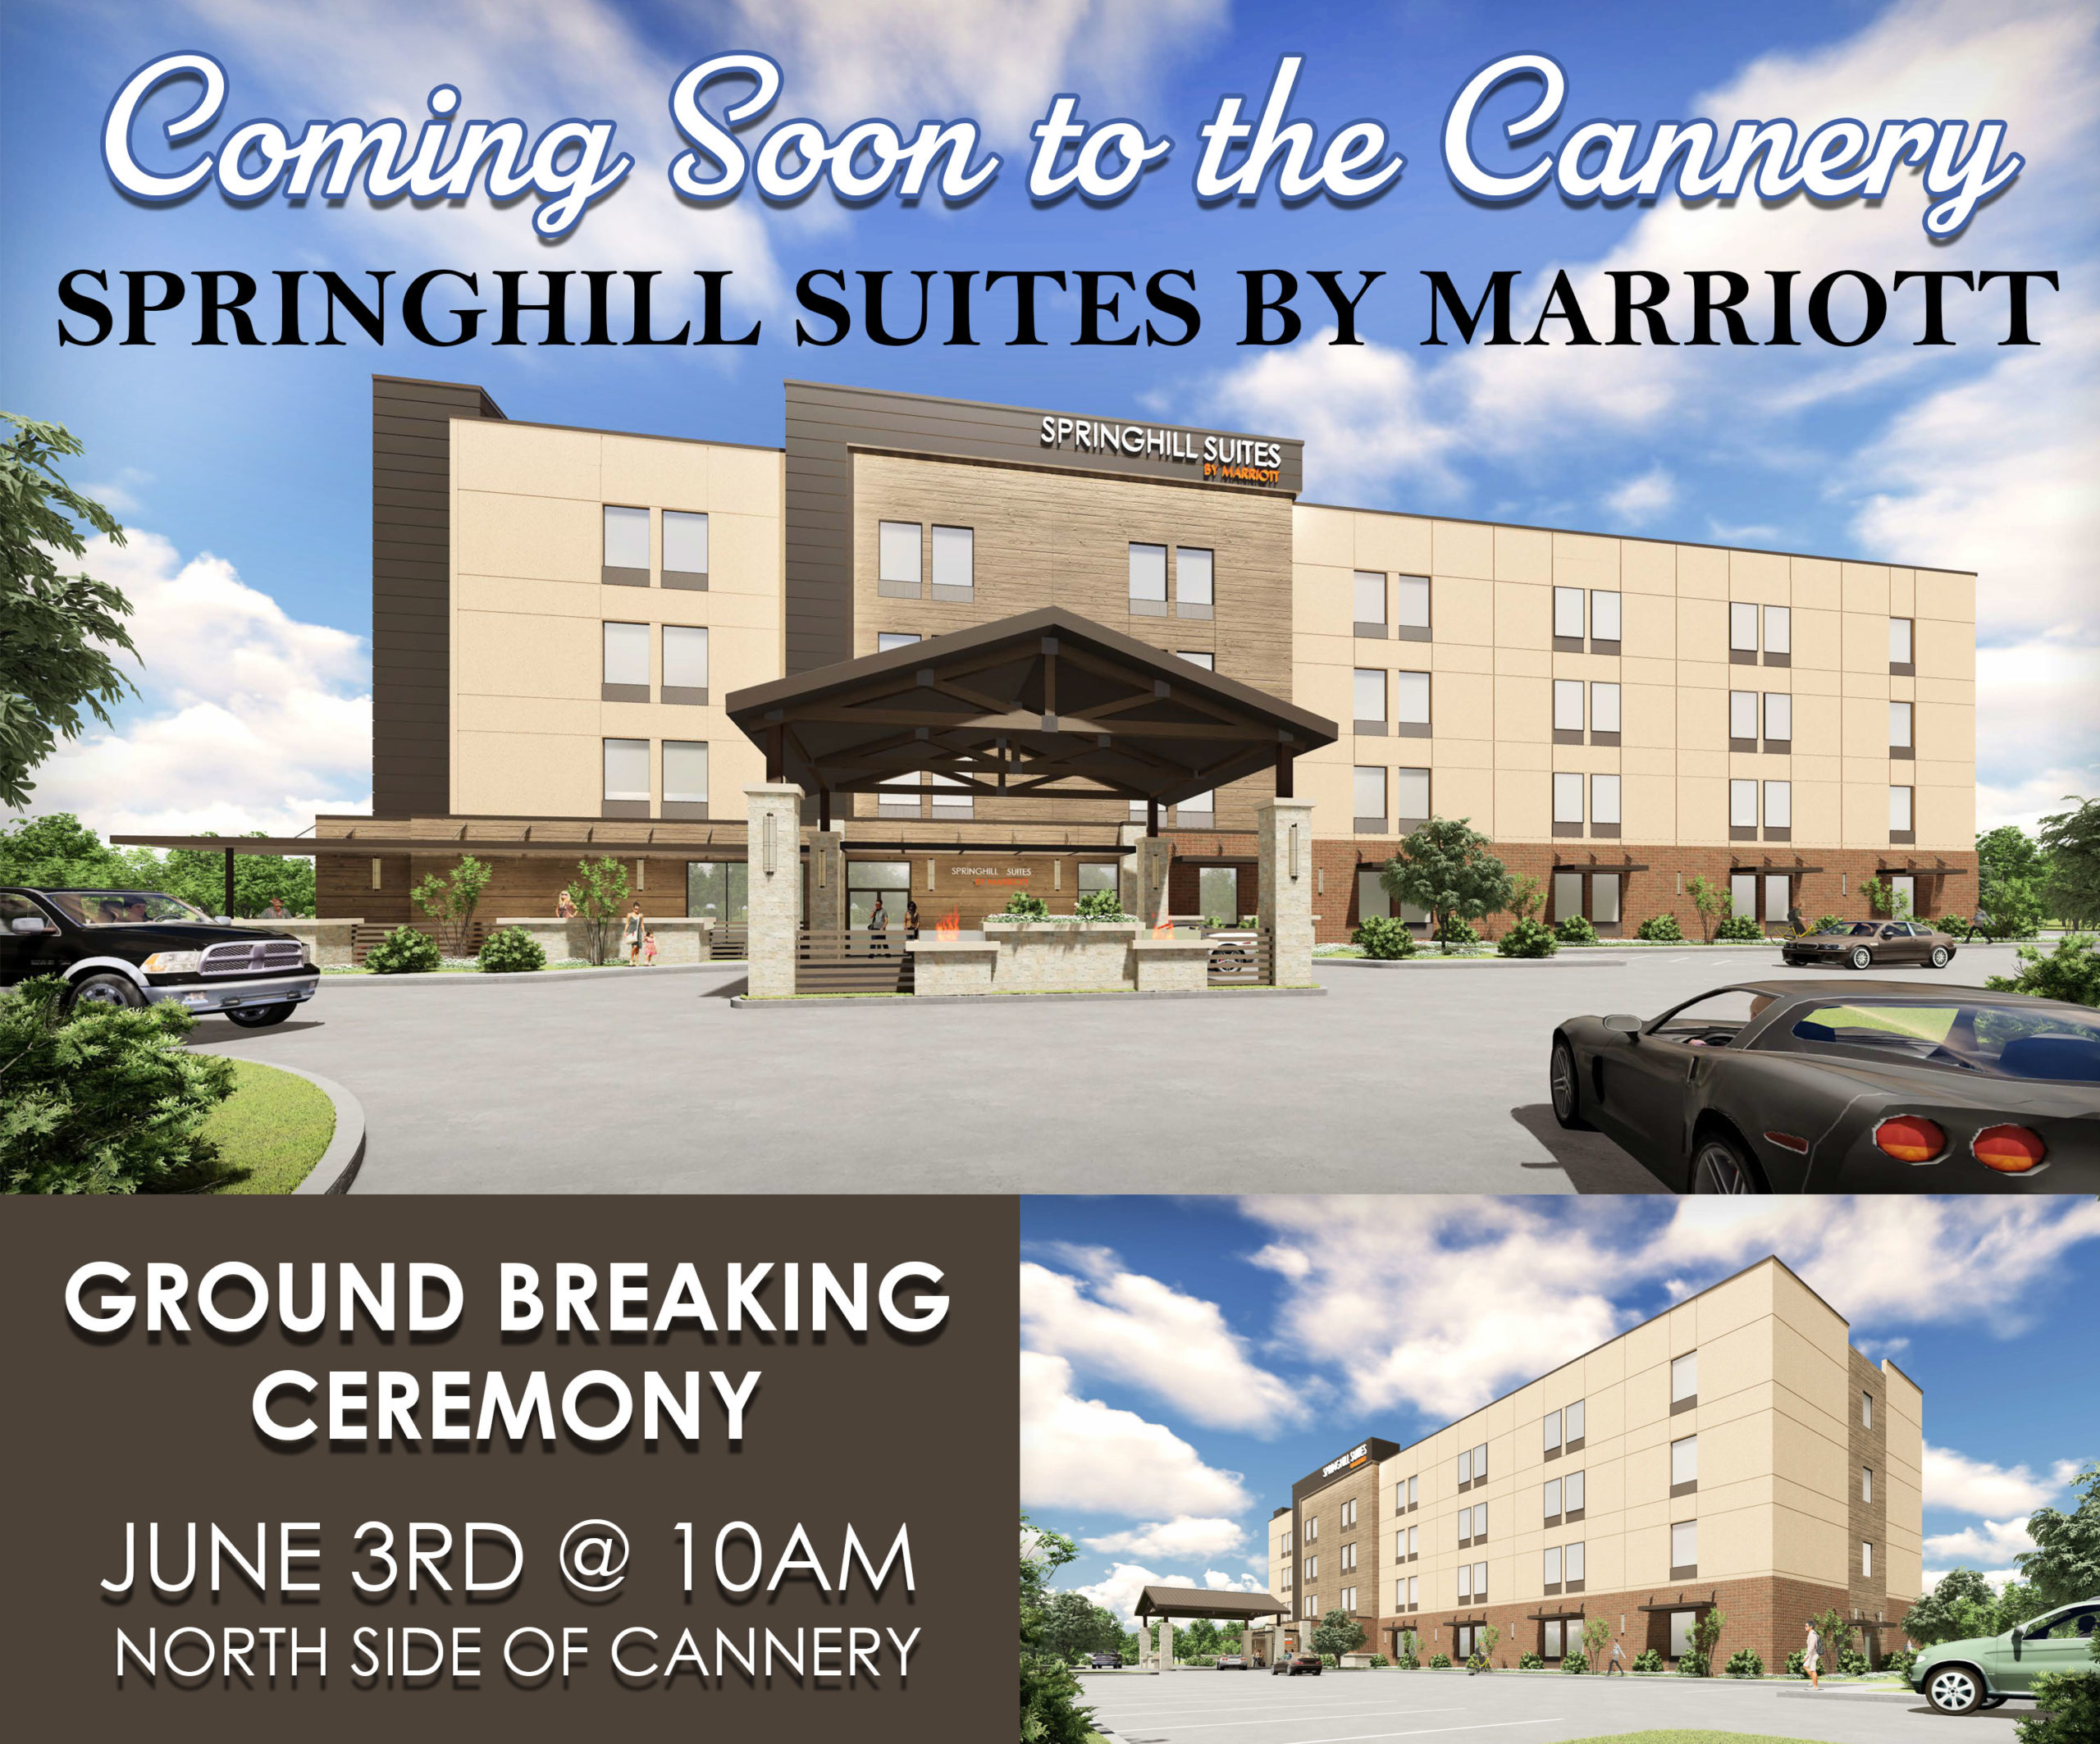 The Cannery Lindale Announces Groundbreaking Ceremony for Springhill Suites by Marriott®